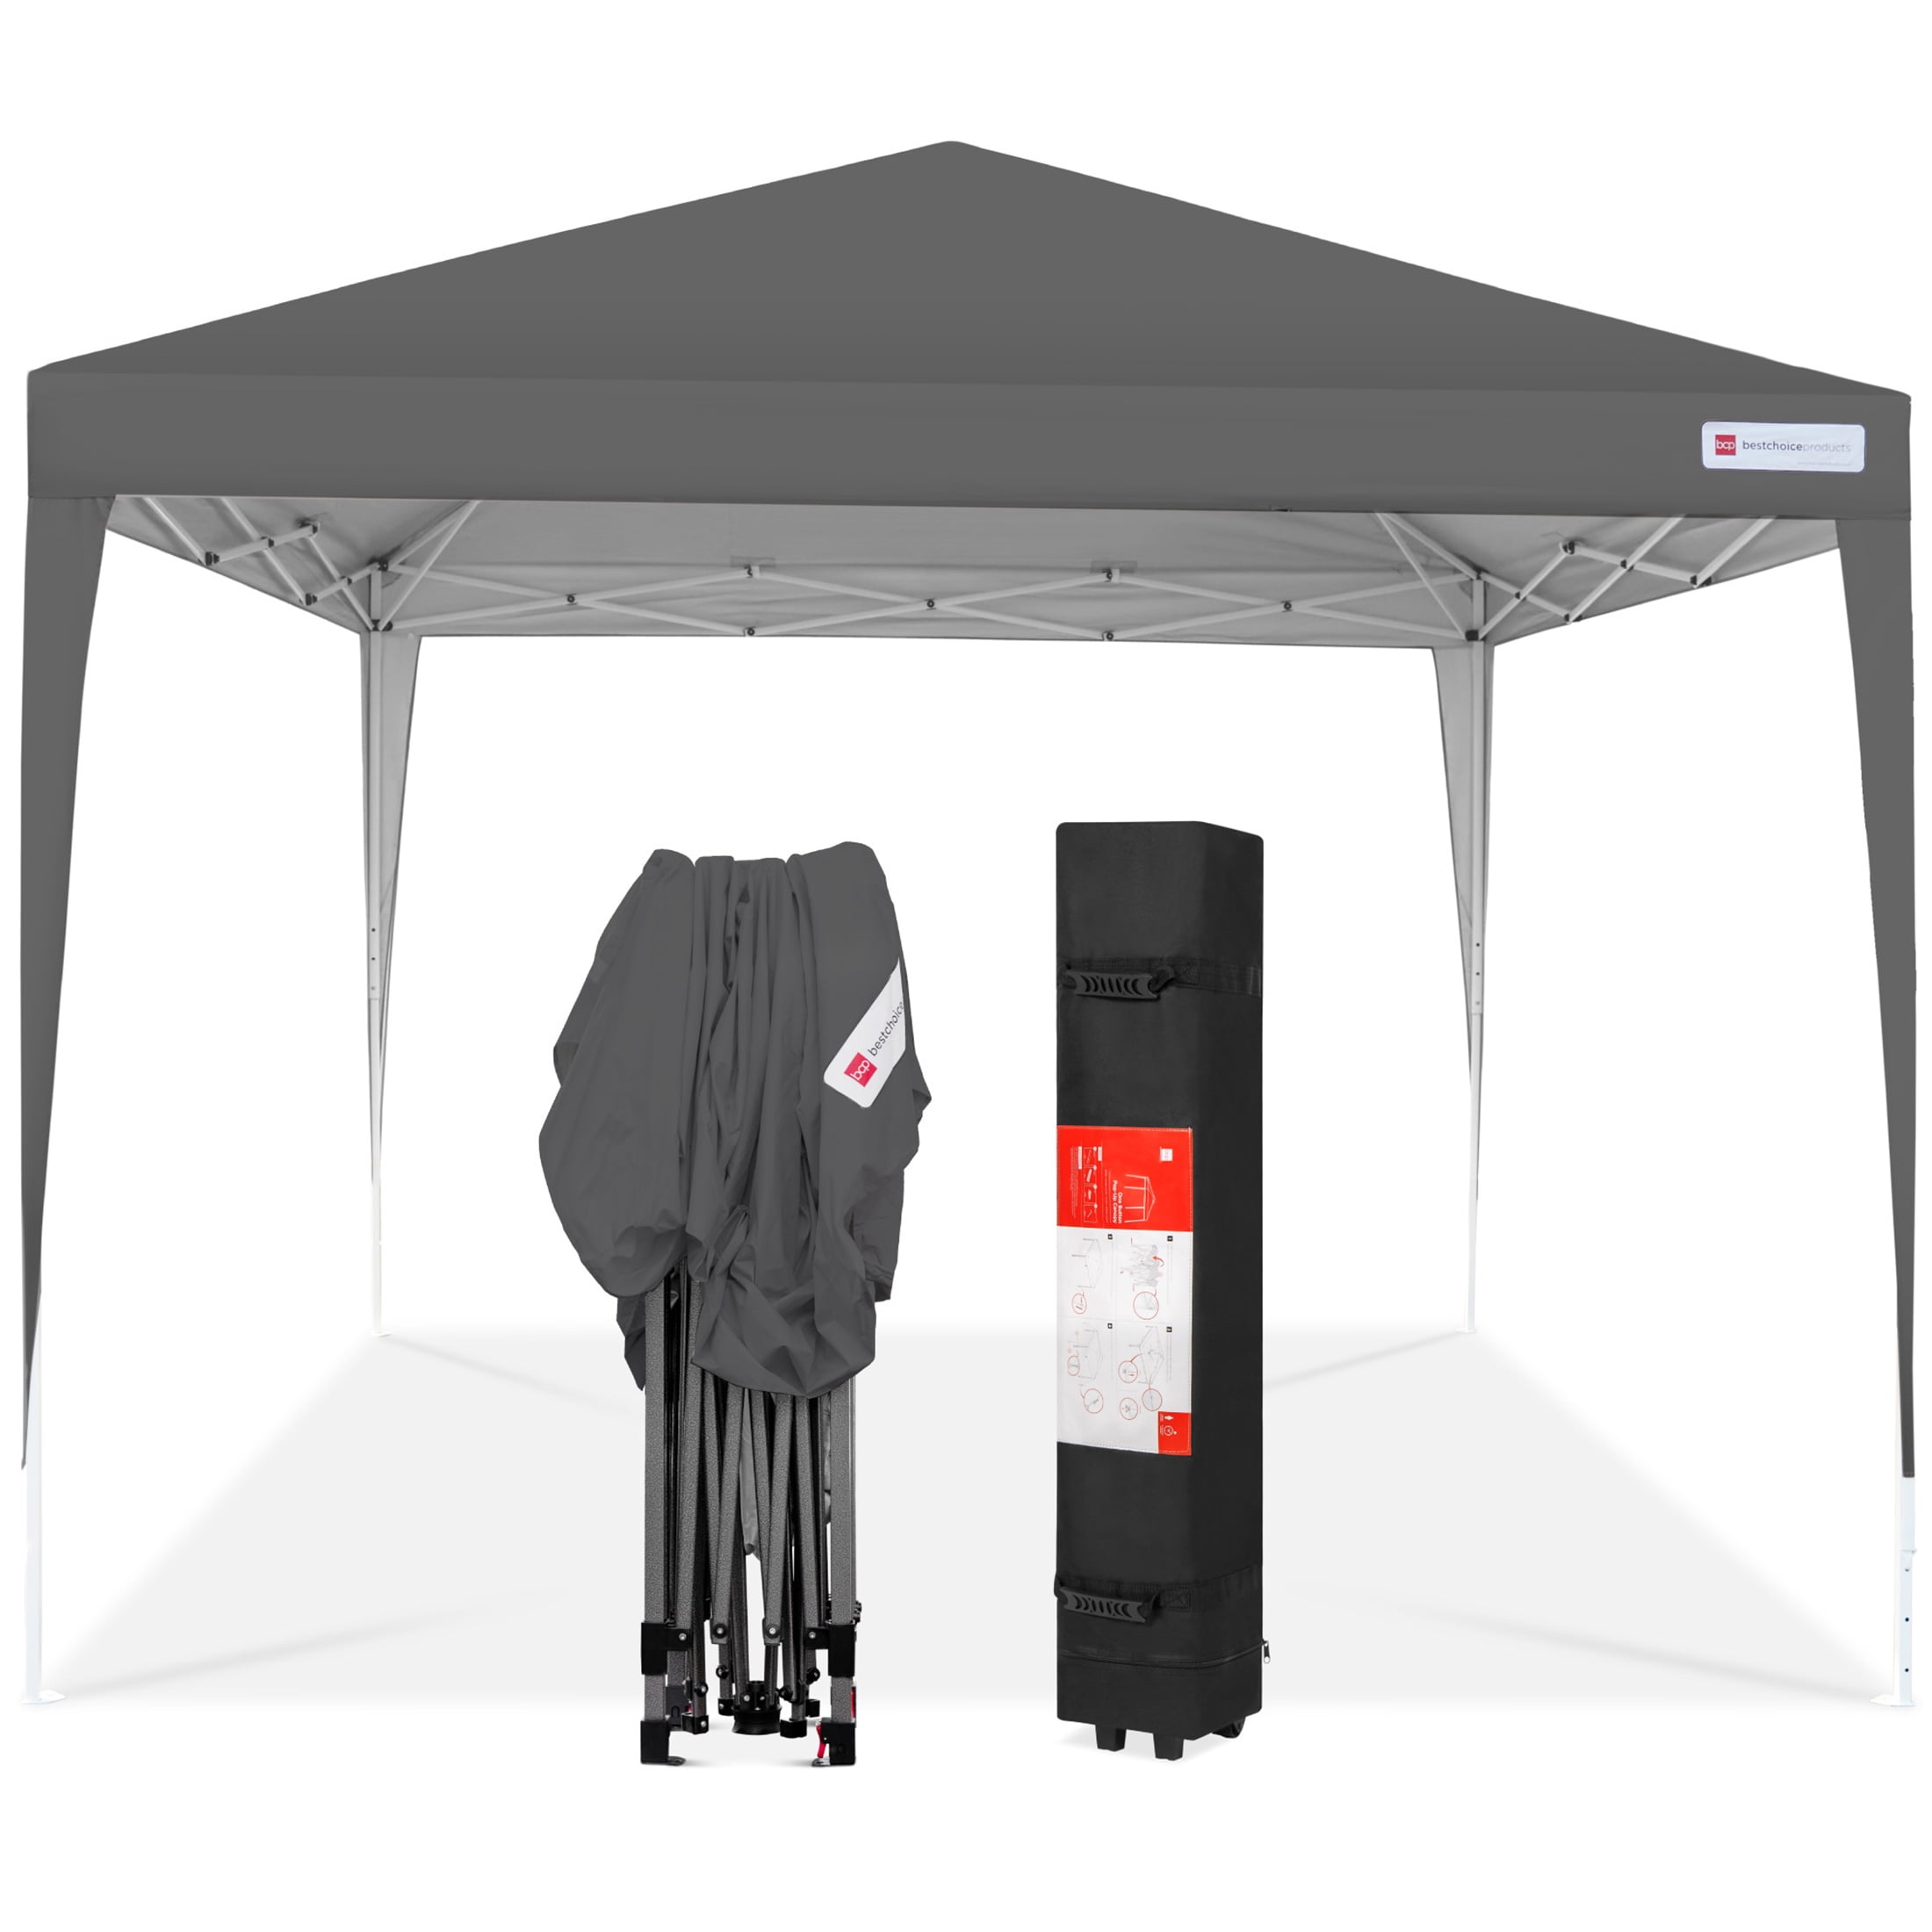 Best Choice Products 10x10ft Outdoor Portable Adjustable Instant Pop Up  Gazebo Canopy Tent w/ Carrying Bag - Dark Gray - Walmart.com